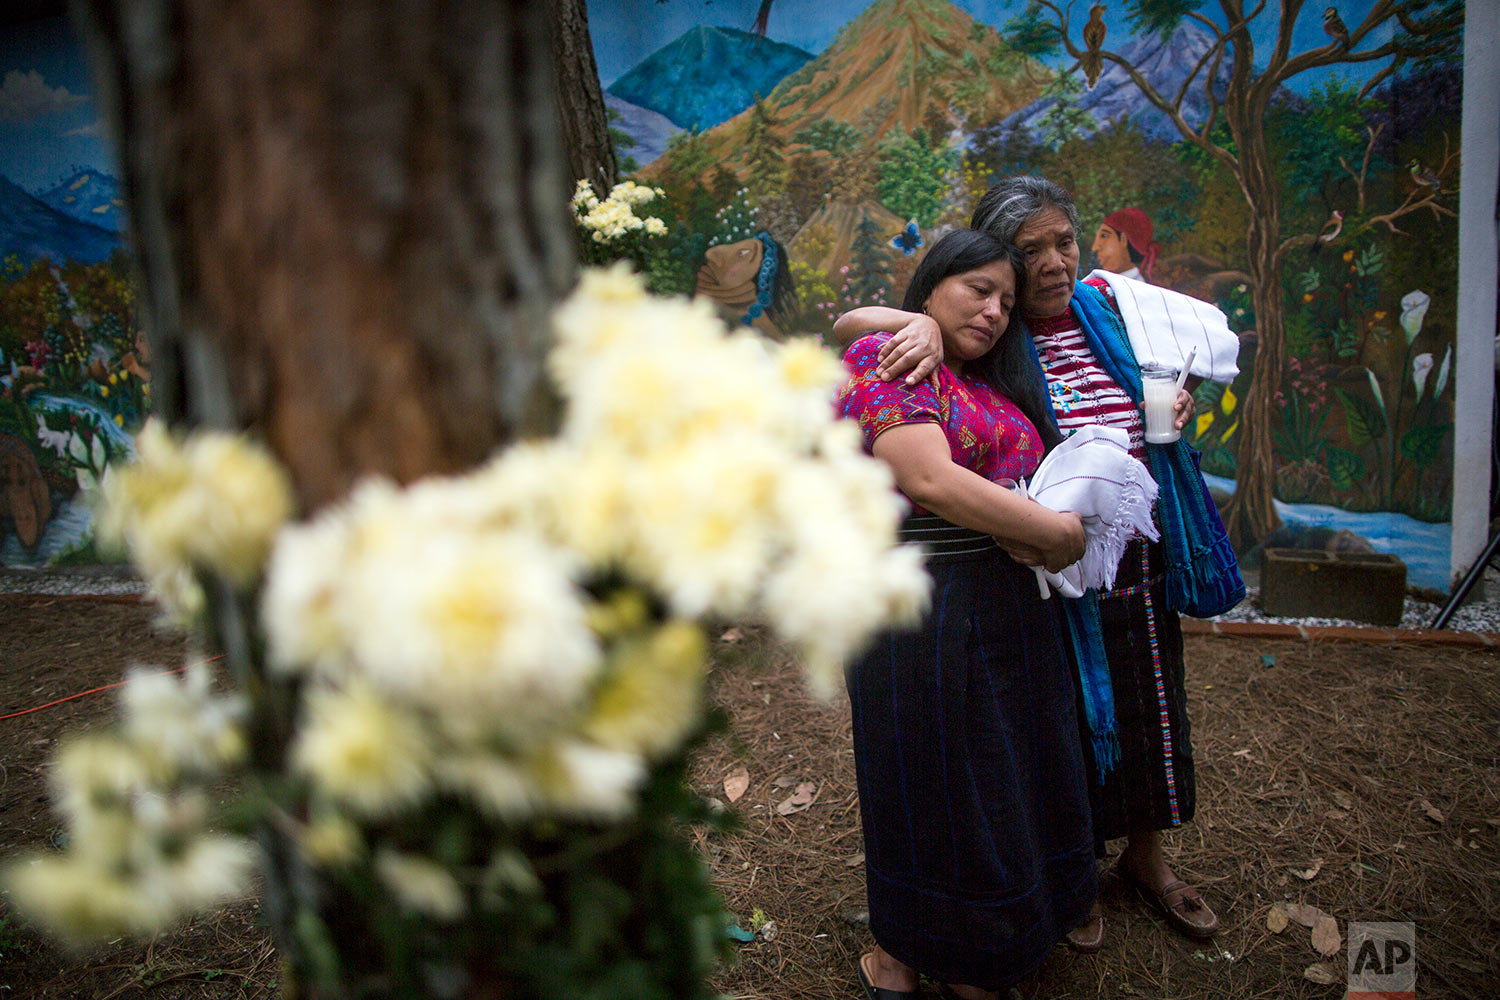  In this June 21, 2018 photo, women console each other during the former burial of 172 unidentified people who were exhumed from what was once a military camp, at the same site they were discovered in San Juan Comalapa, Guatemala. (AP Photo/Rodrigo A